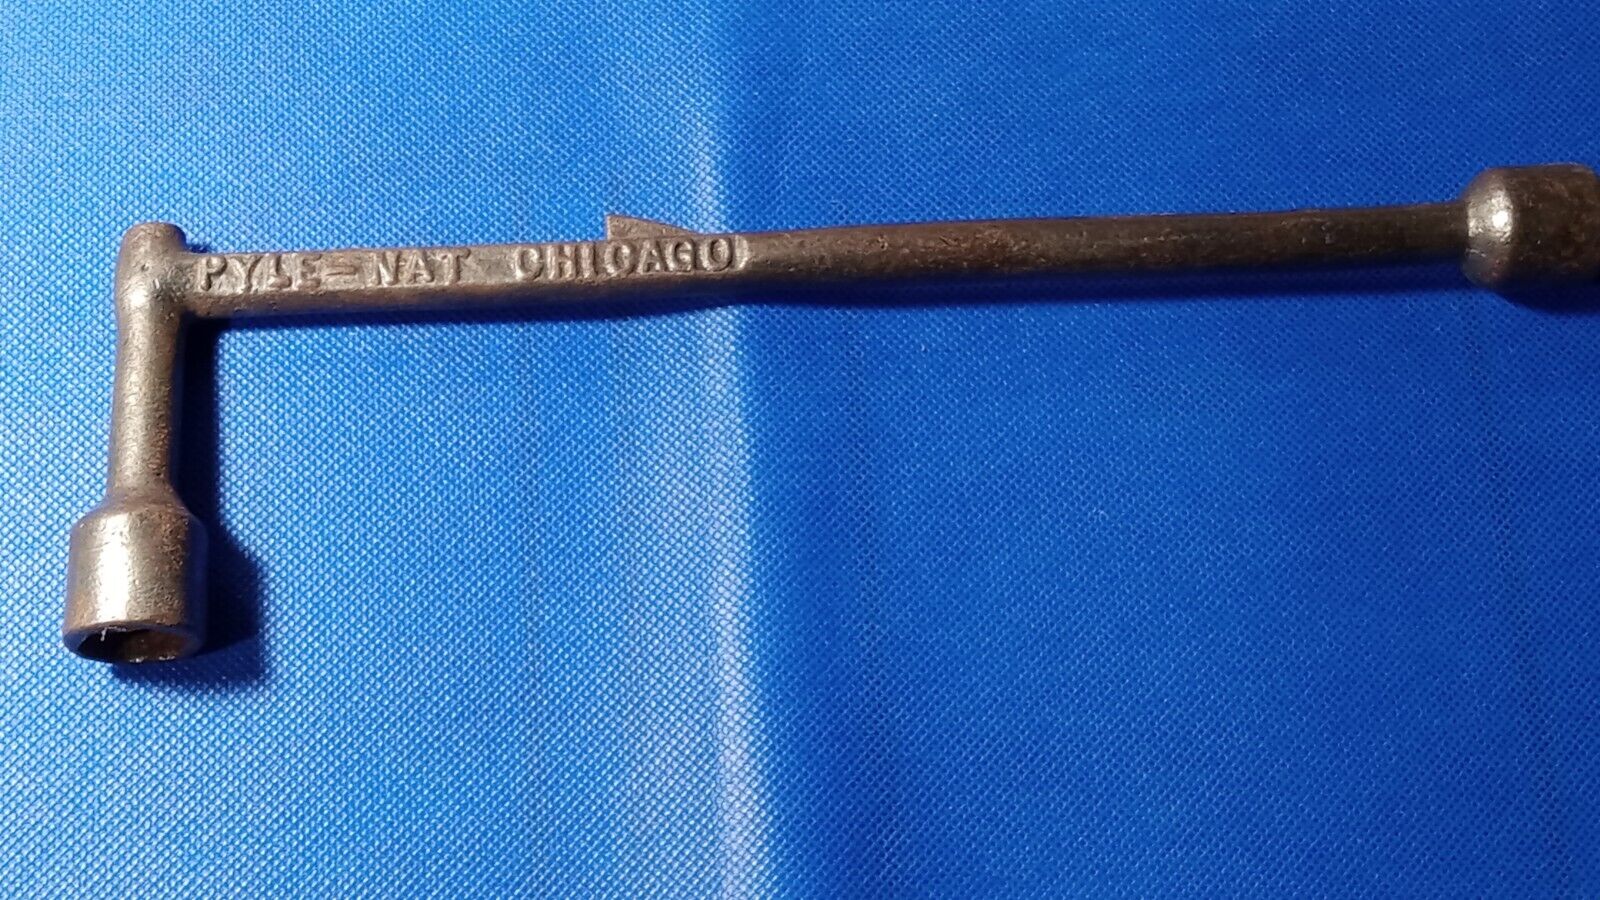 Pyle National Chicago Railroad Antique Spanner WrencH